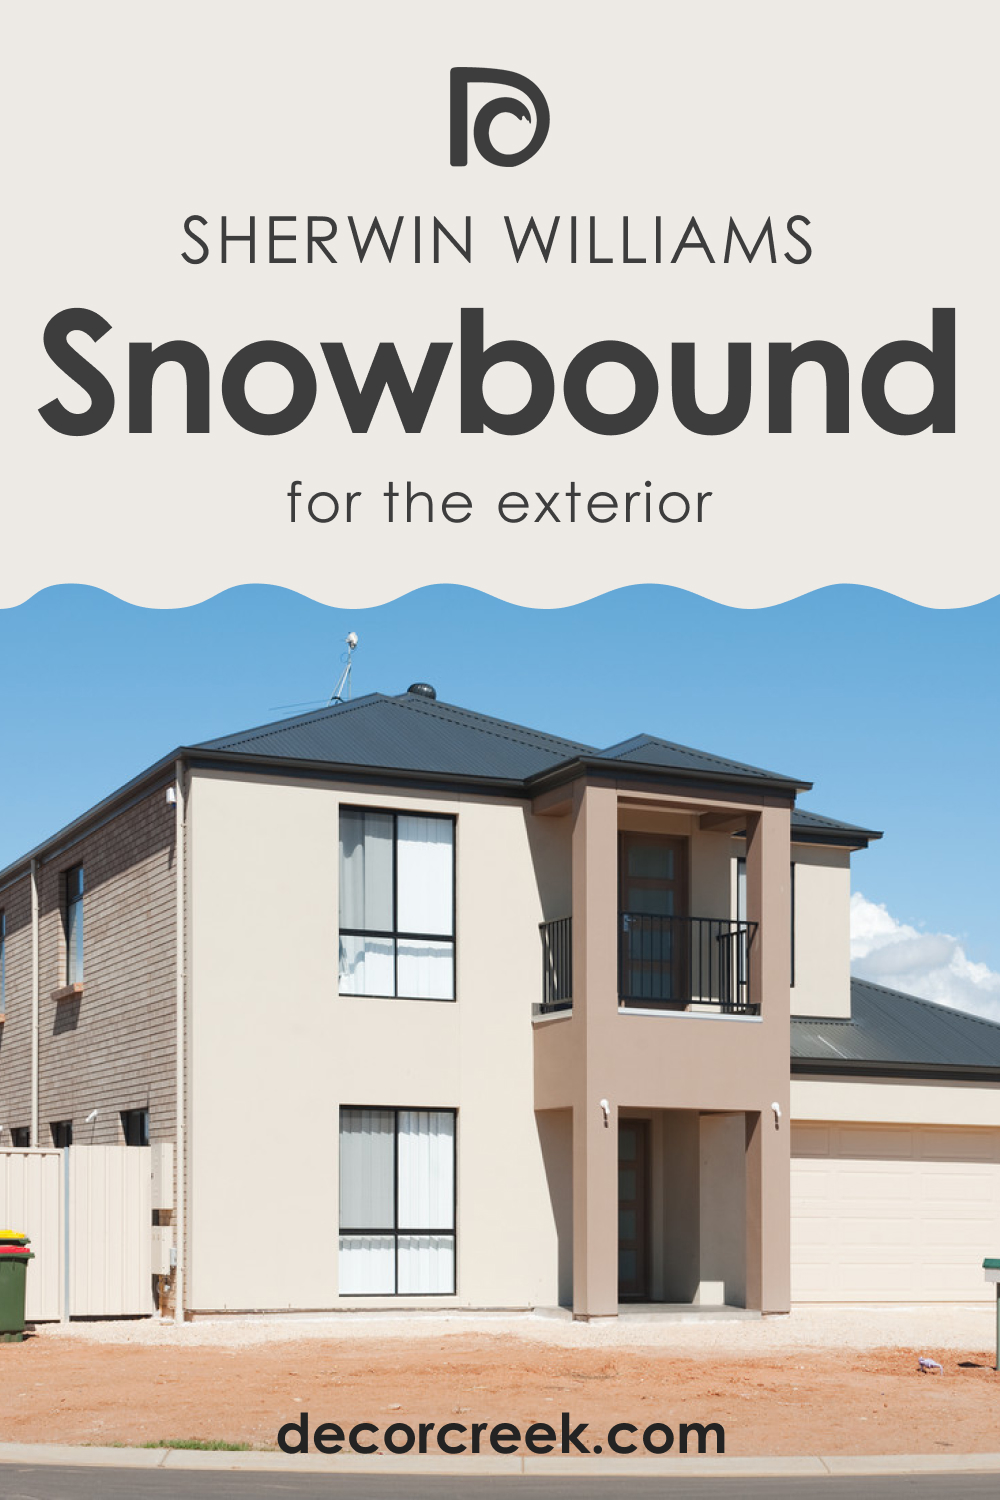 How to Use Snowbound SW 7004 for an Exterior?